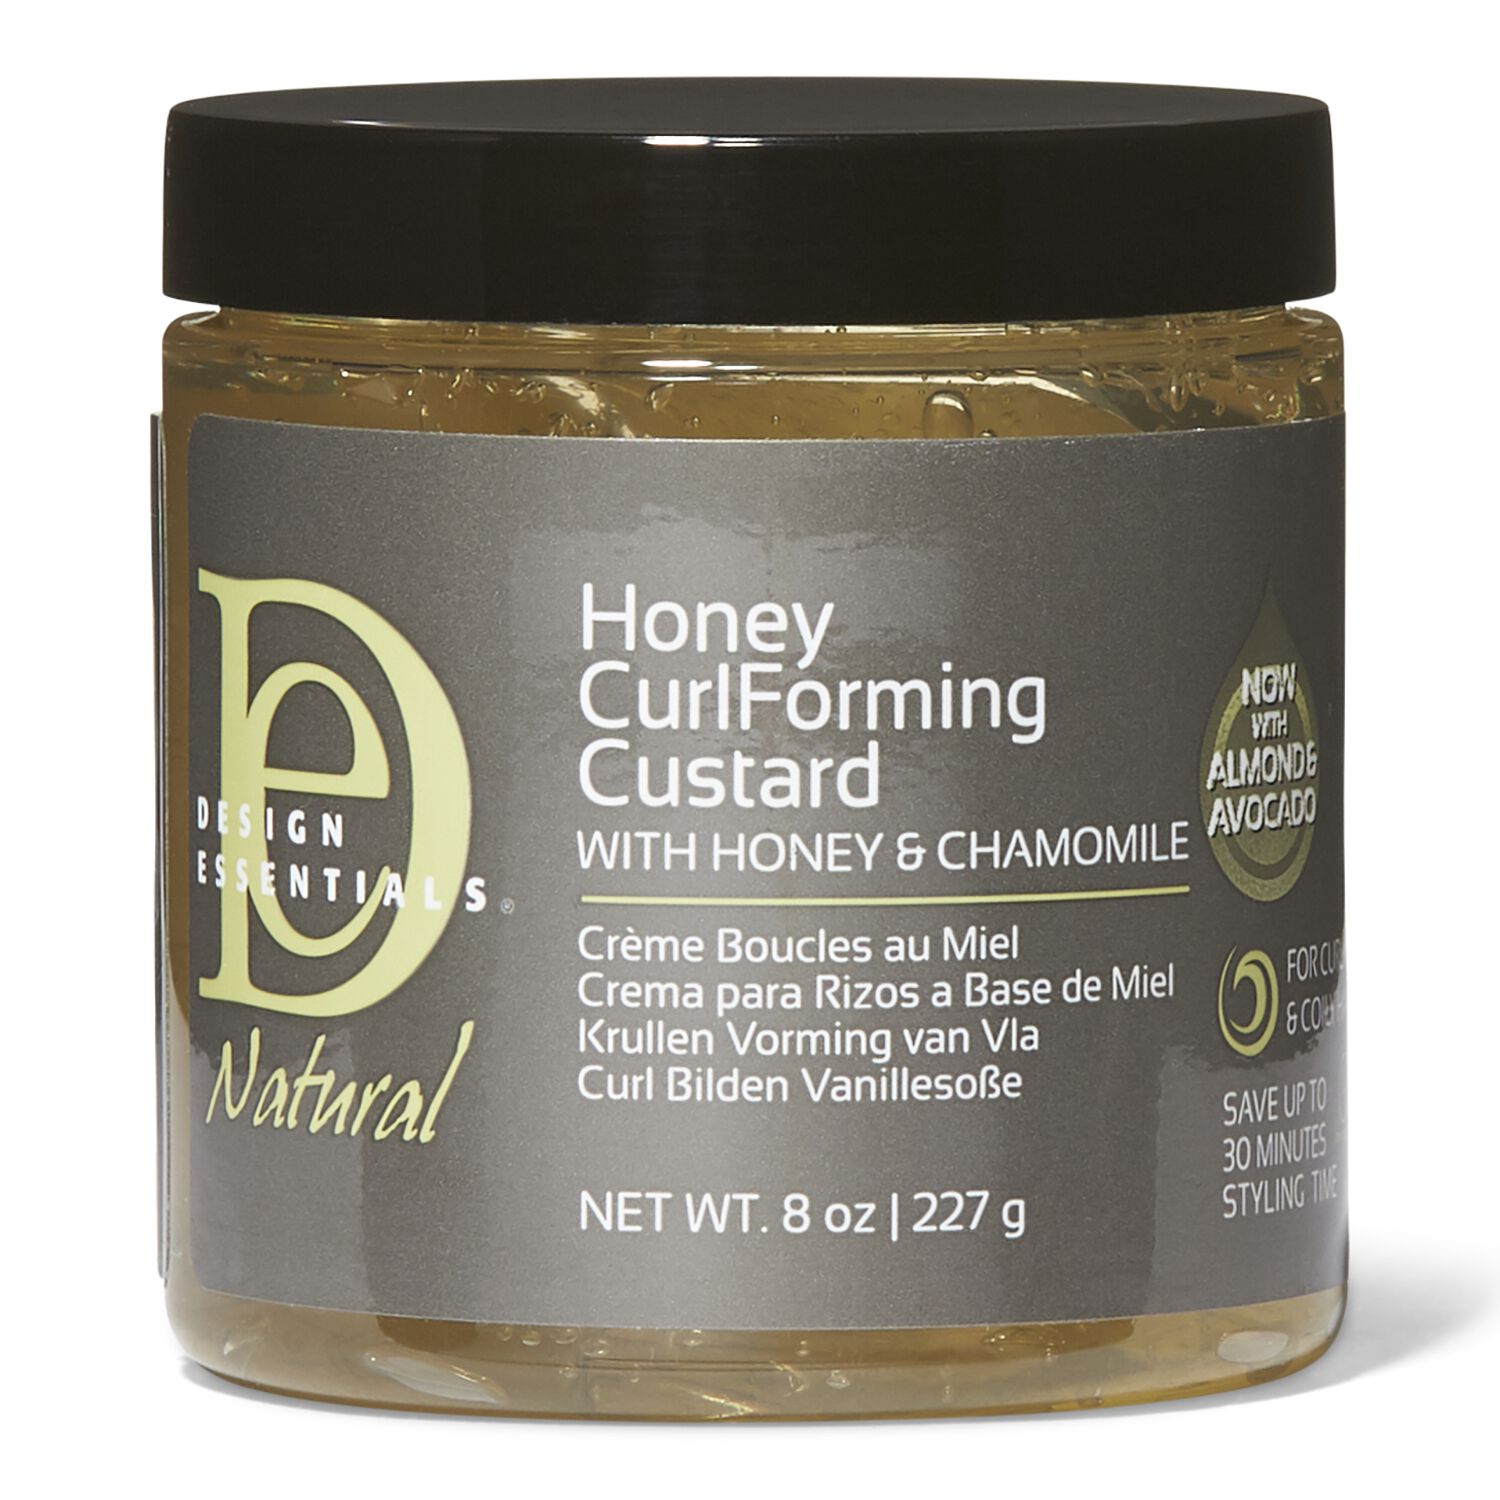 design-essentials-natural-honey-curl-forming-custard-styling-products